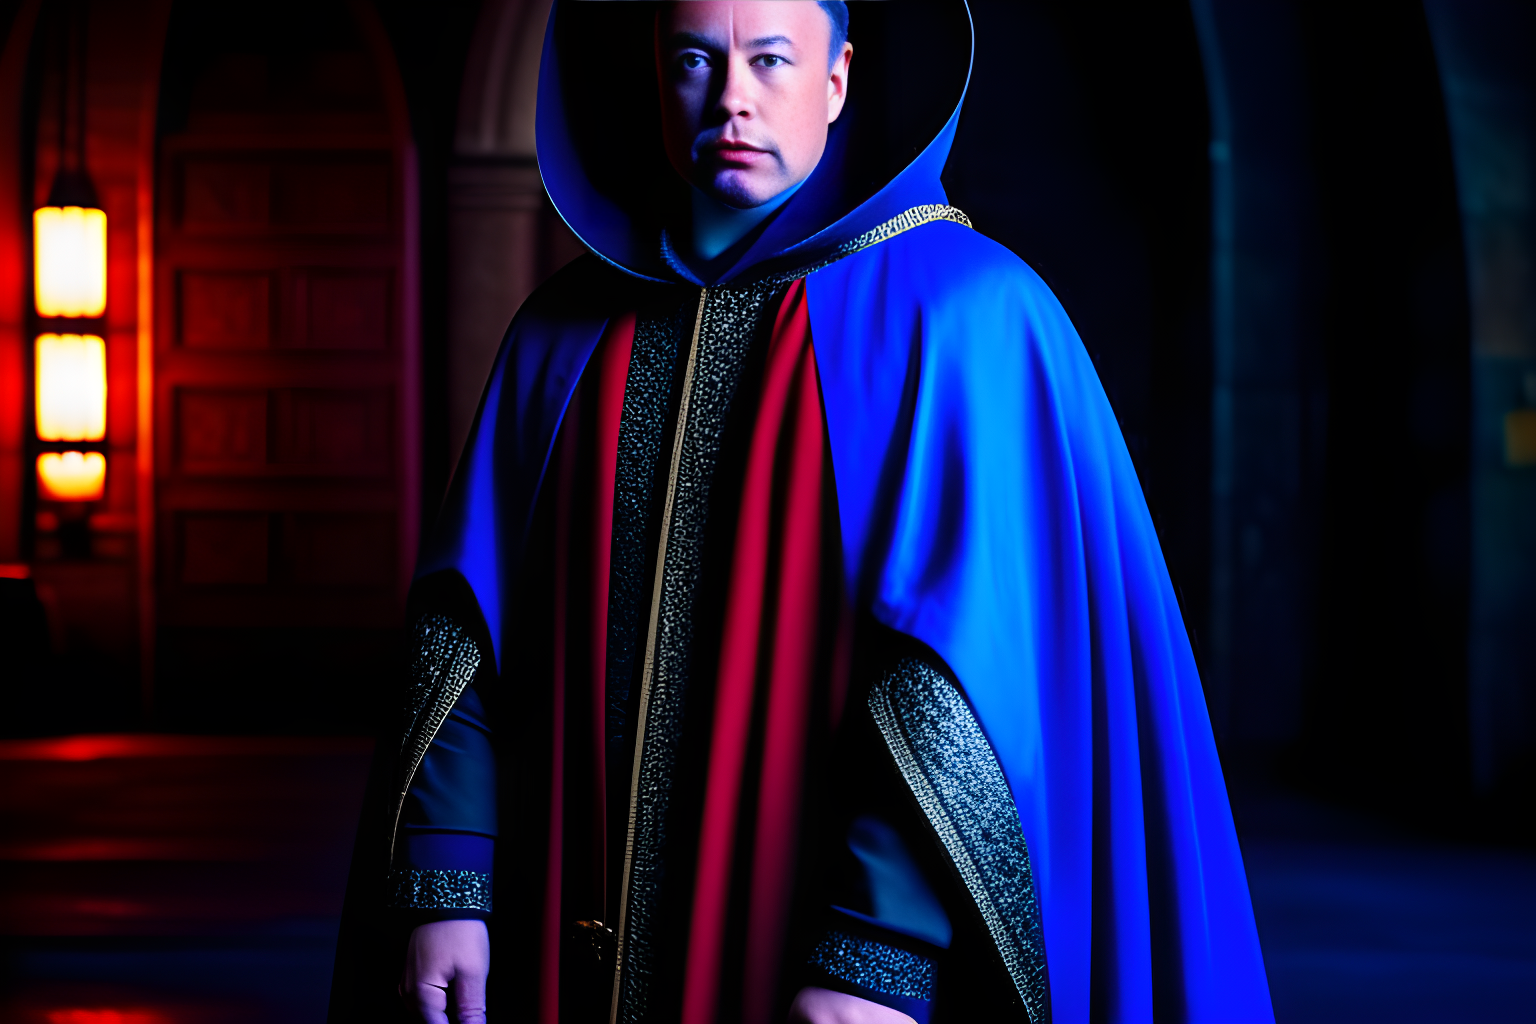 Elon Musk in medieval times wearing a wizard's robe